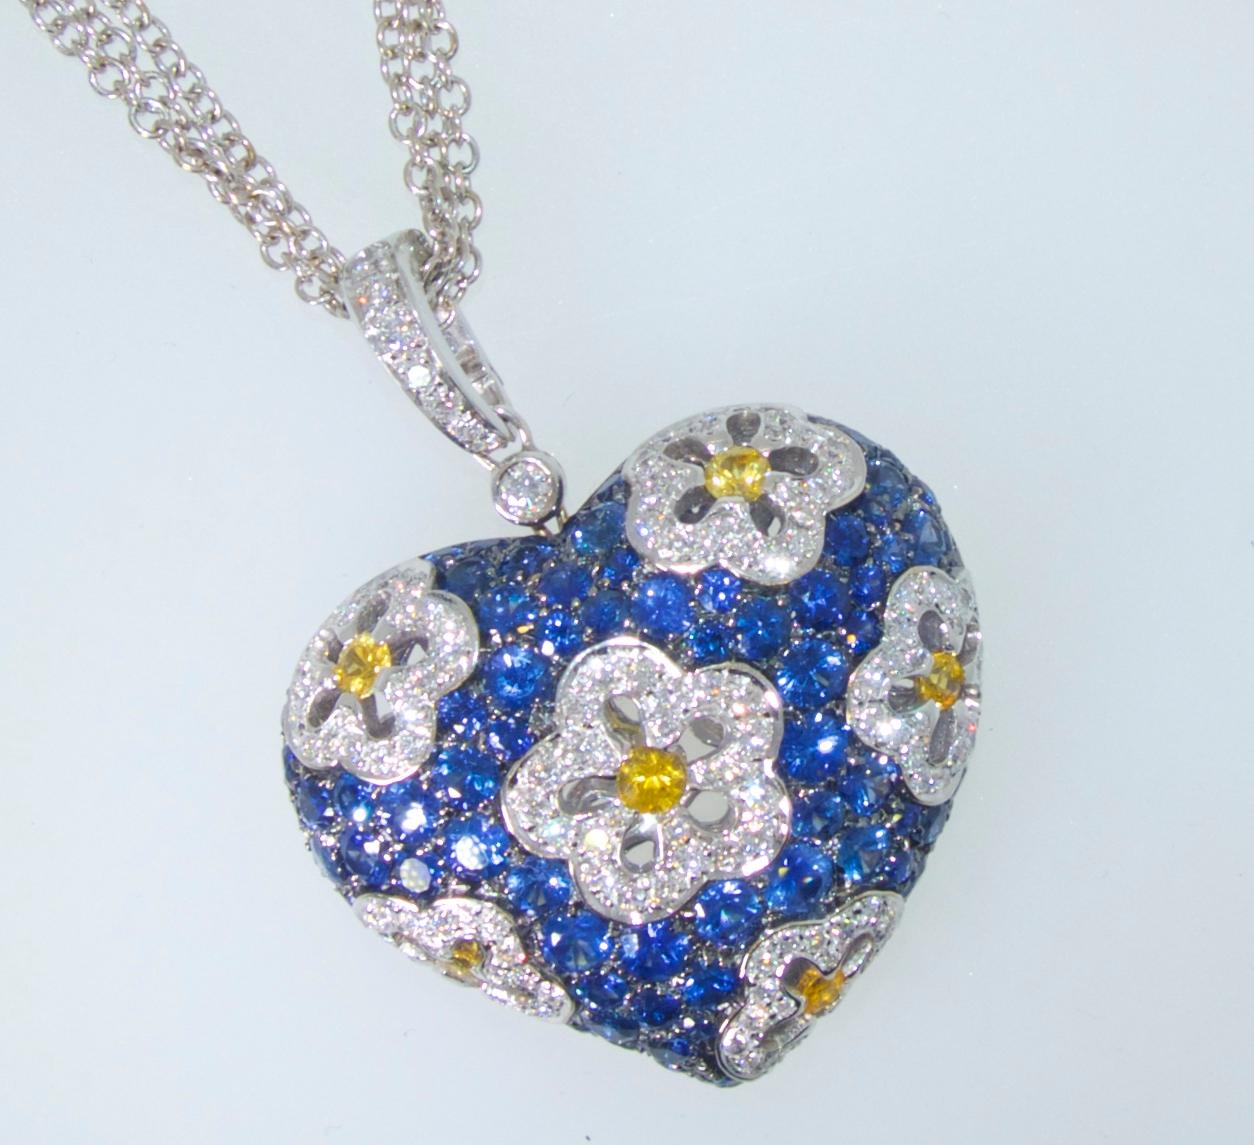 Sapphire and diamond large heart motif pendant necklace with pave set fine natural blue sapphires weighing approximately 5.5 cts., and yellow sapphires weighing approximately .5 cts.  The fine white diamonds (G/H, VS) weigh approximately 2.25 cts. 